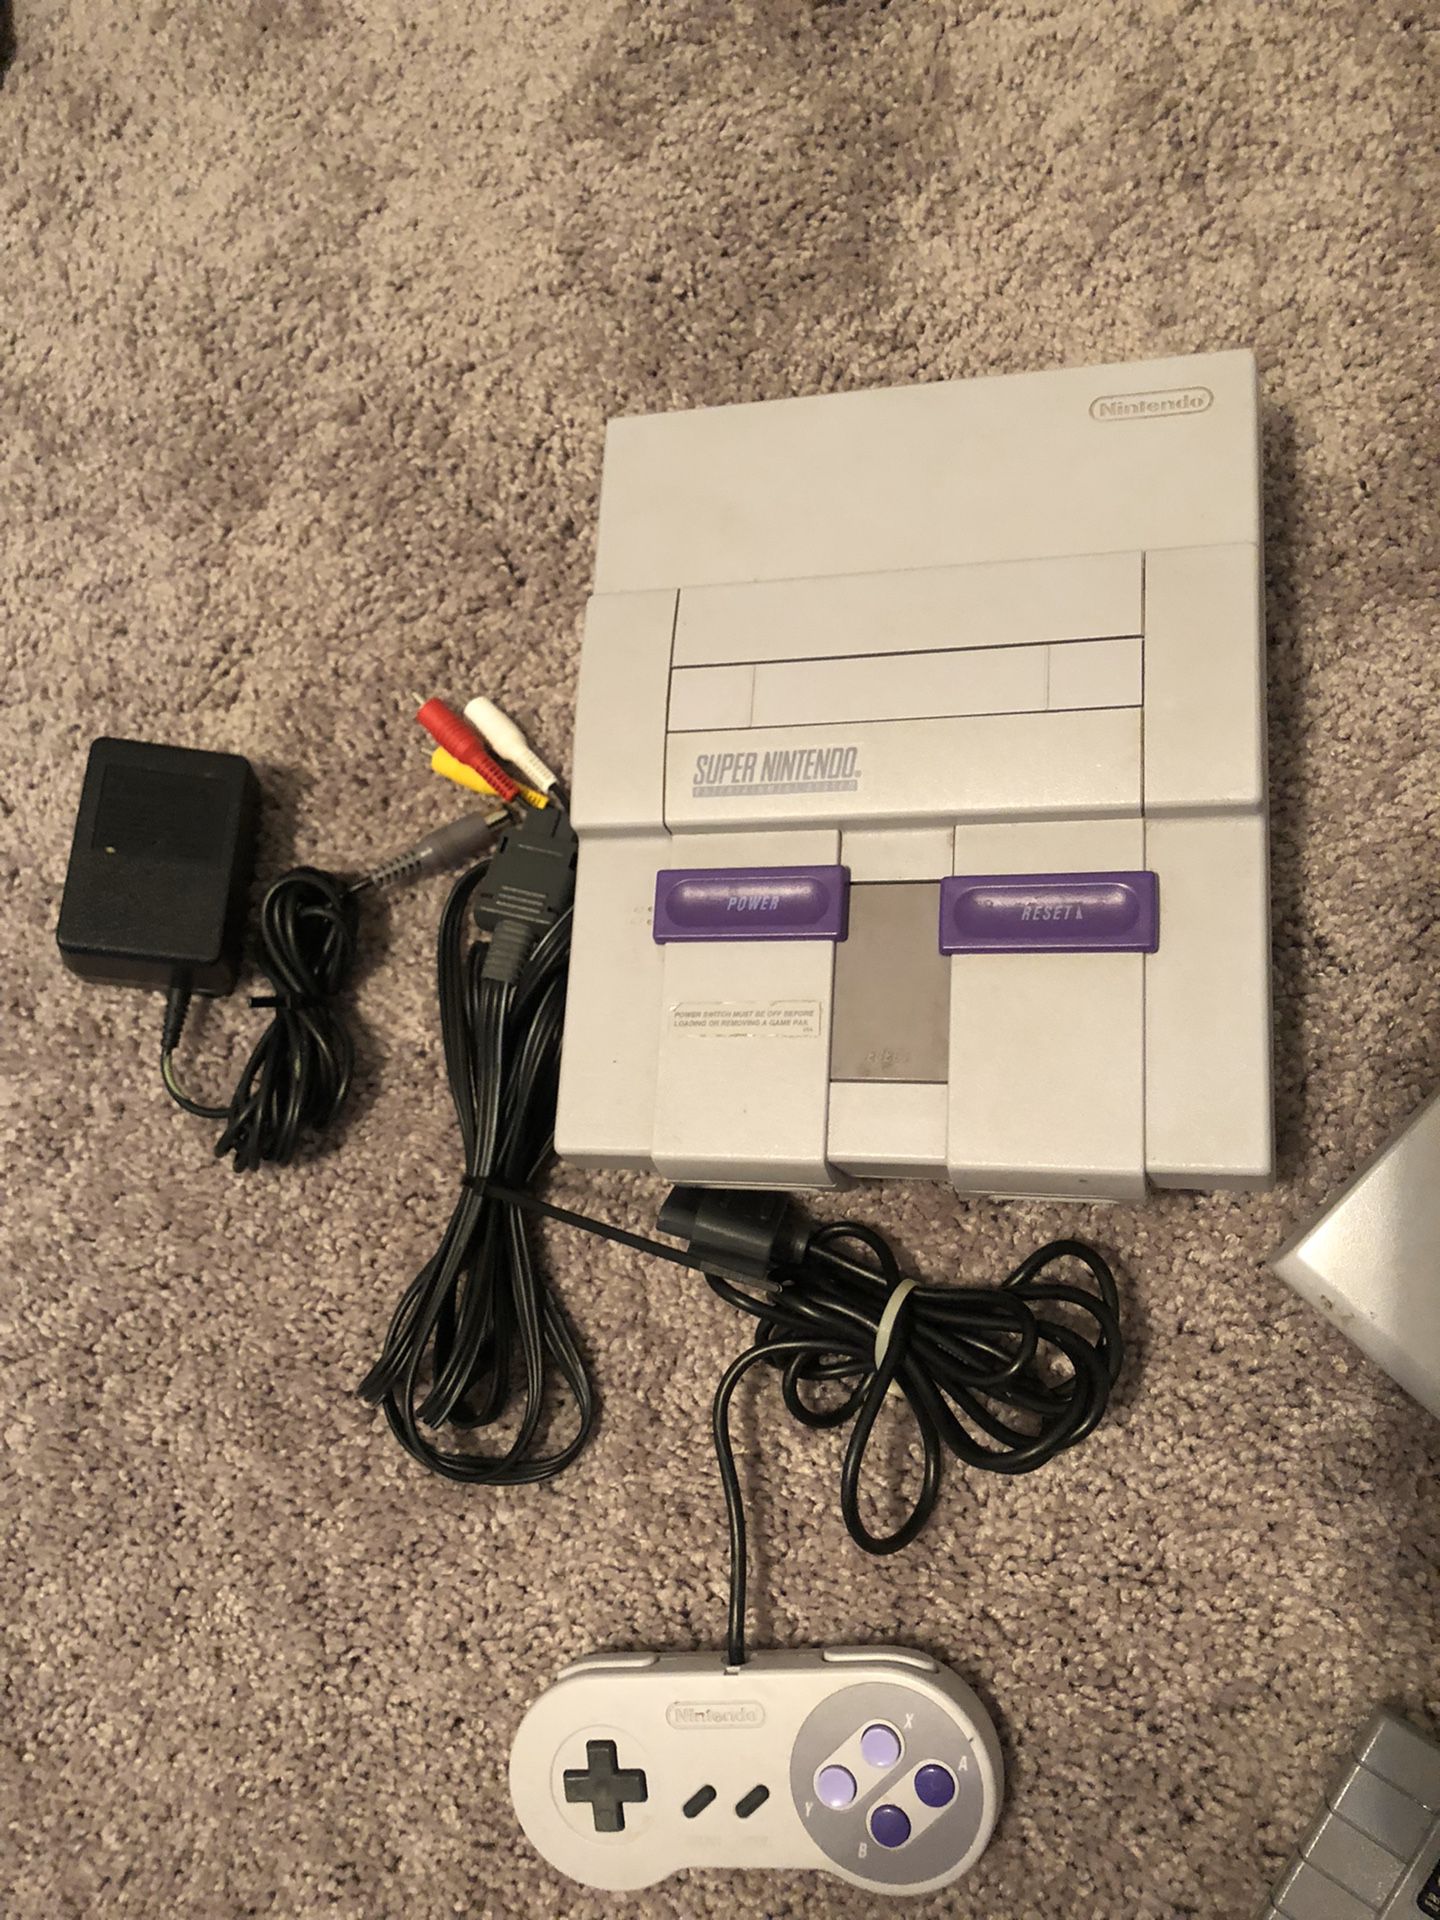 Snes console with controller